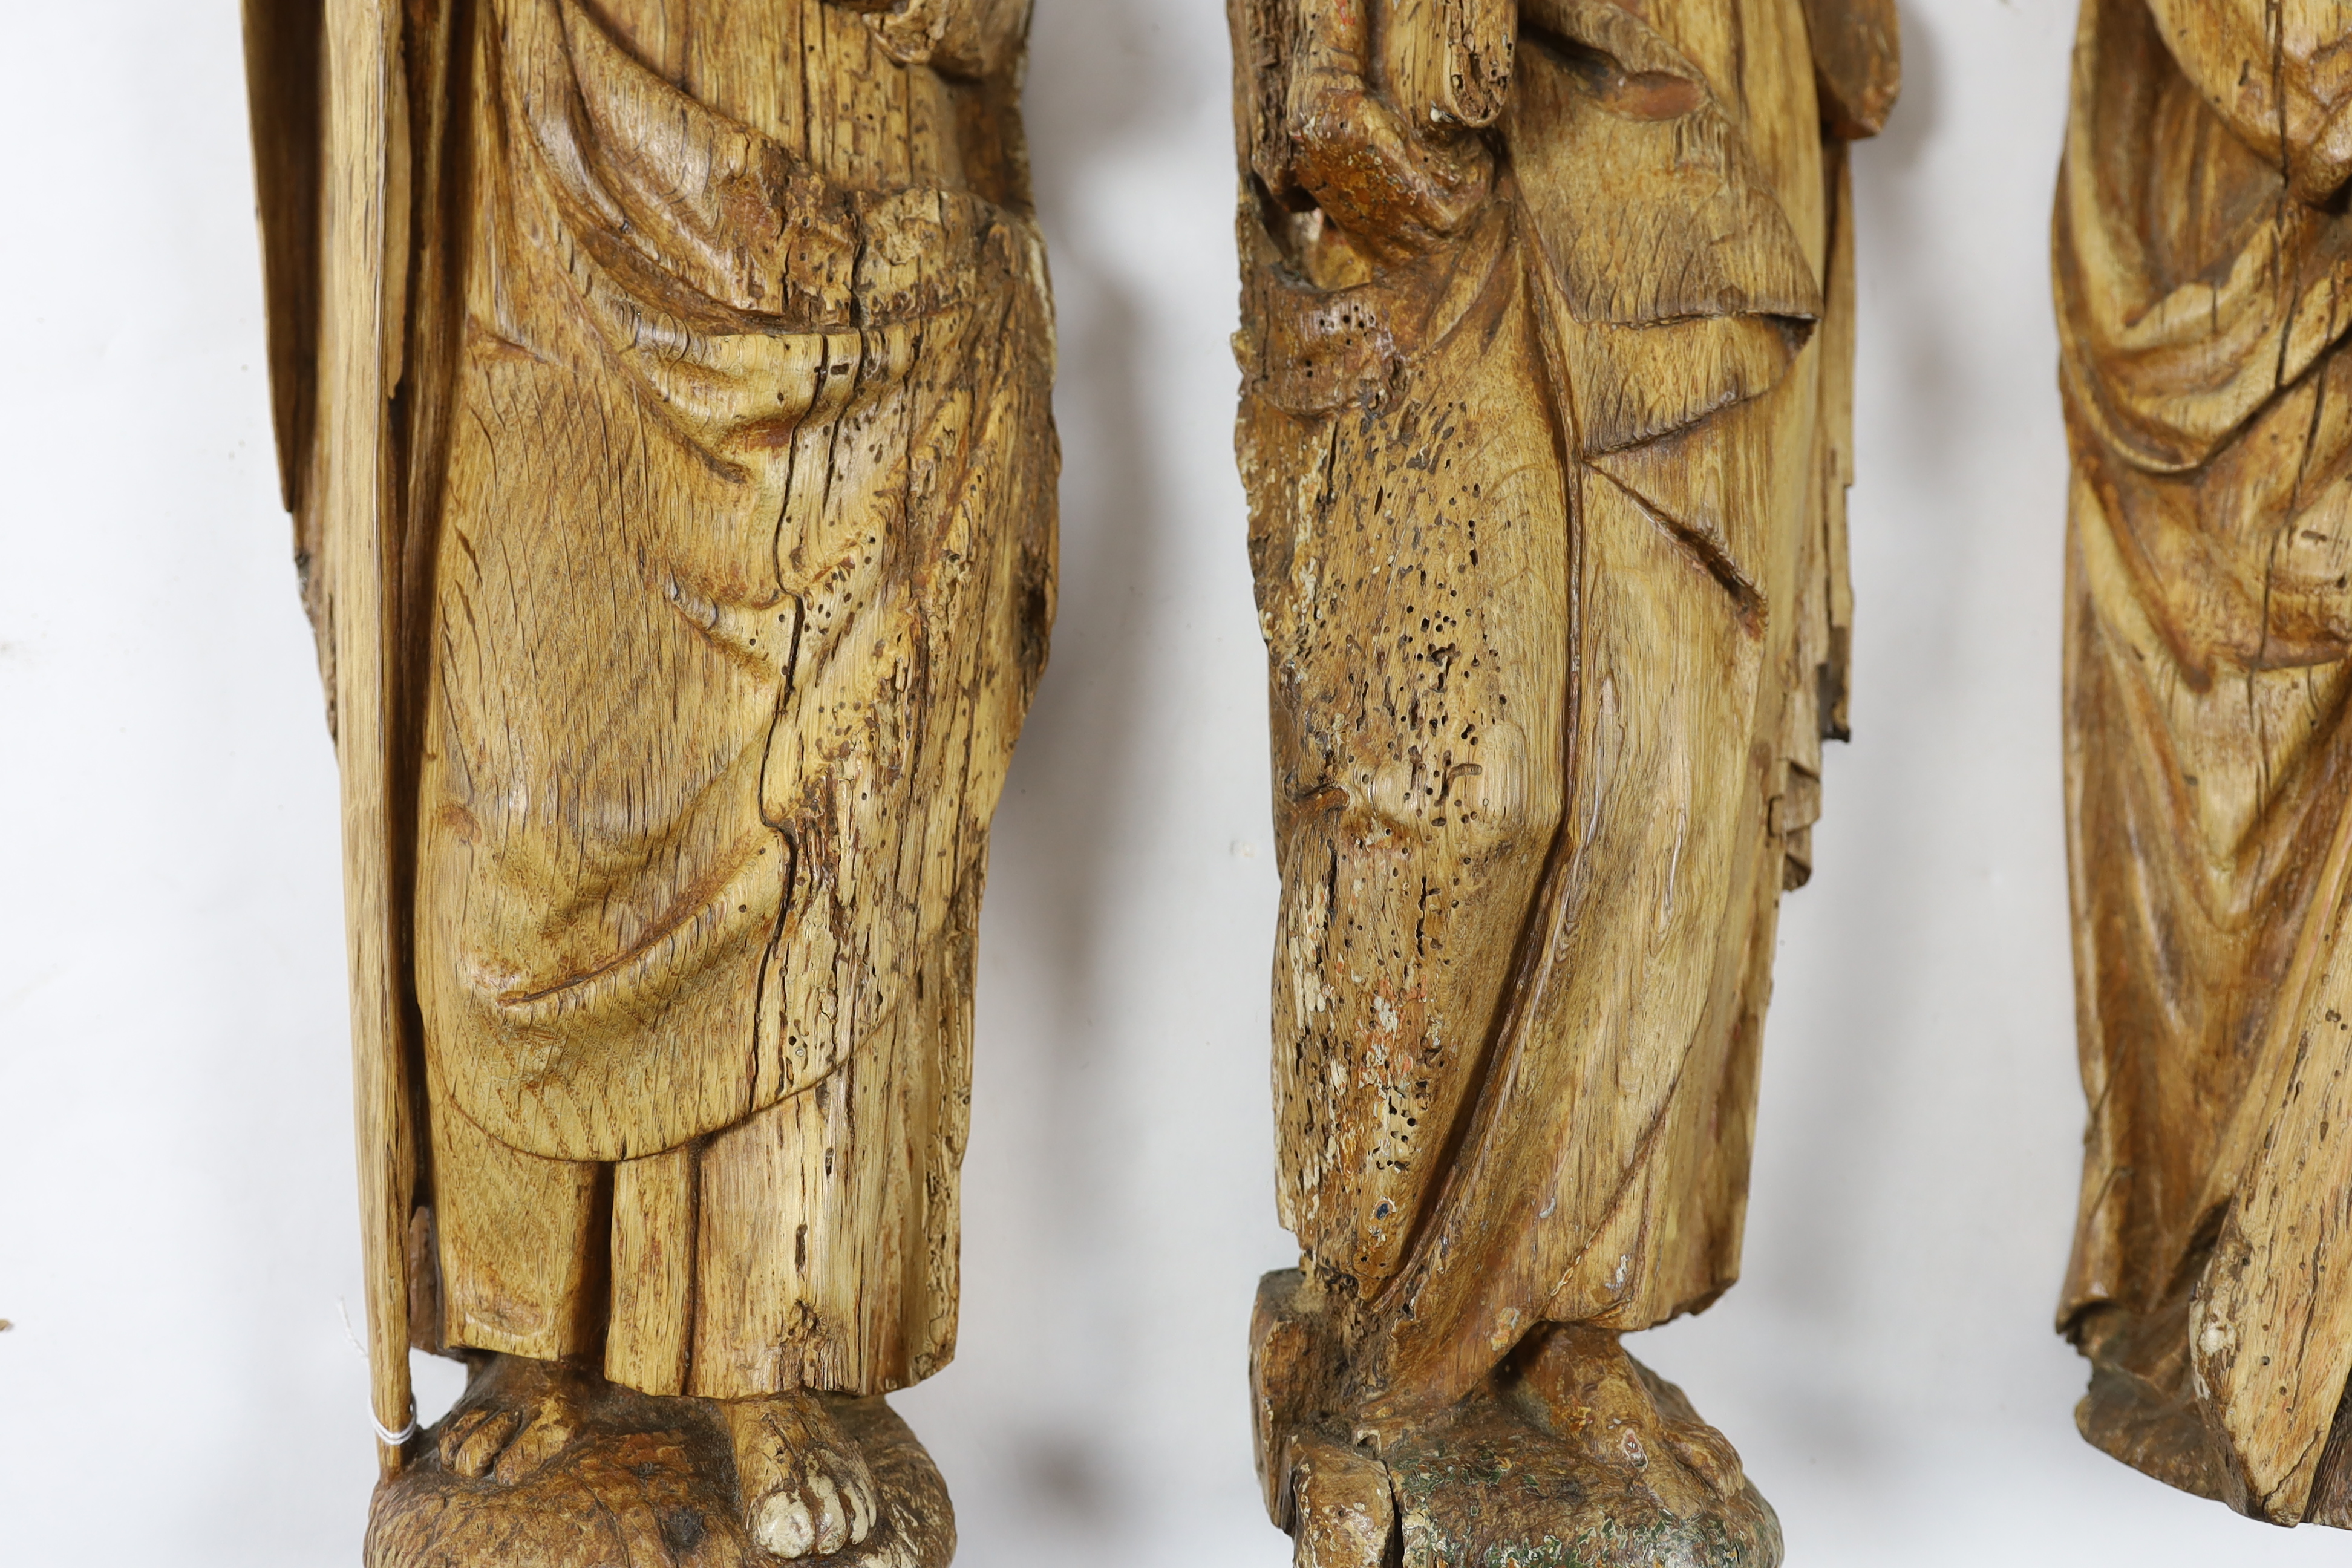 A set of three 18th century Continental carved wood figures of Saints, holding a cross, a bible and a sword, largest 17cm wide, 58cm high